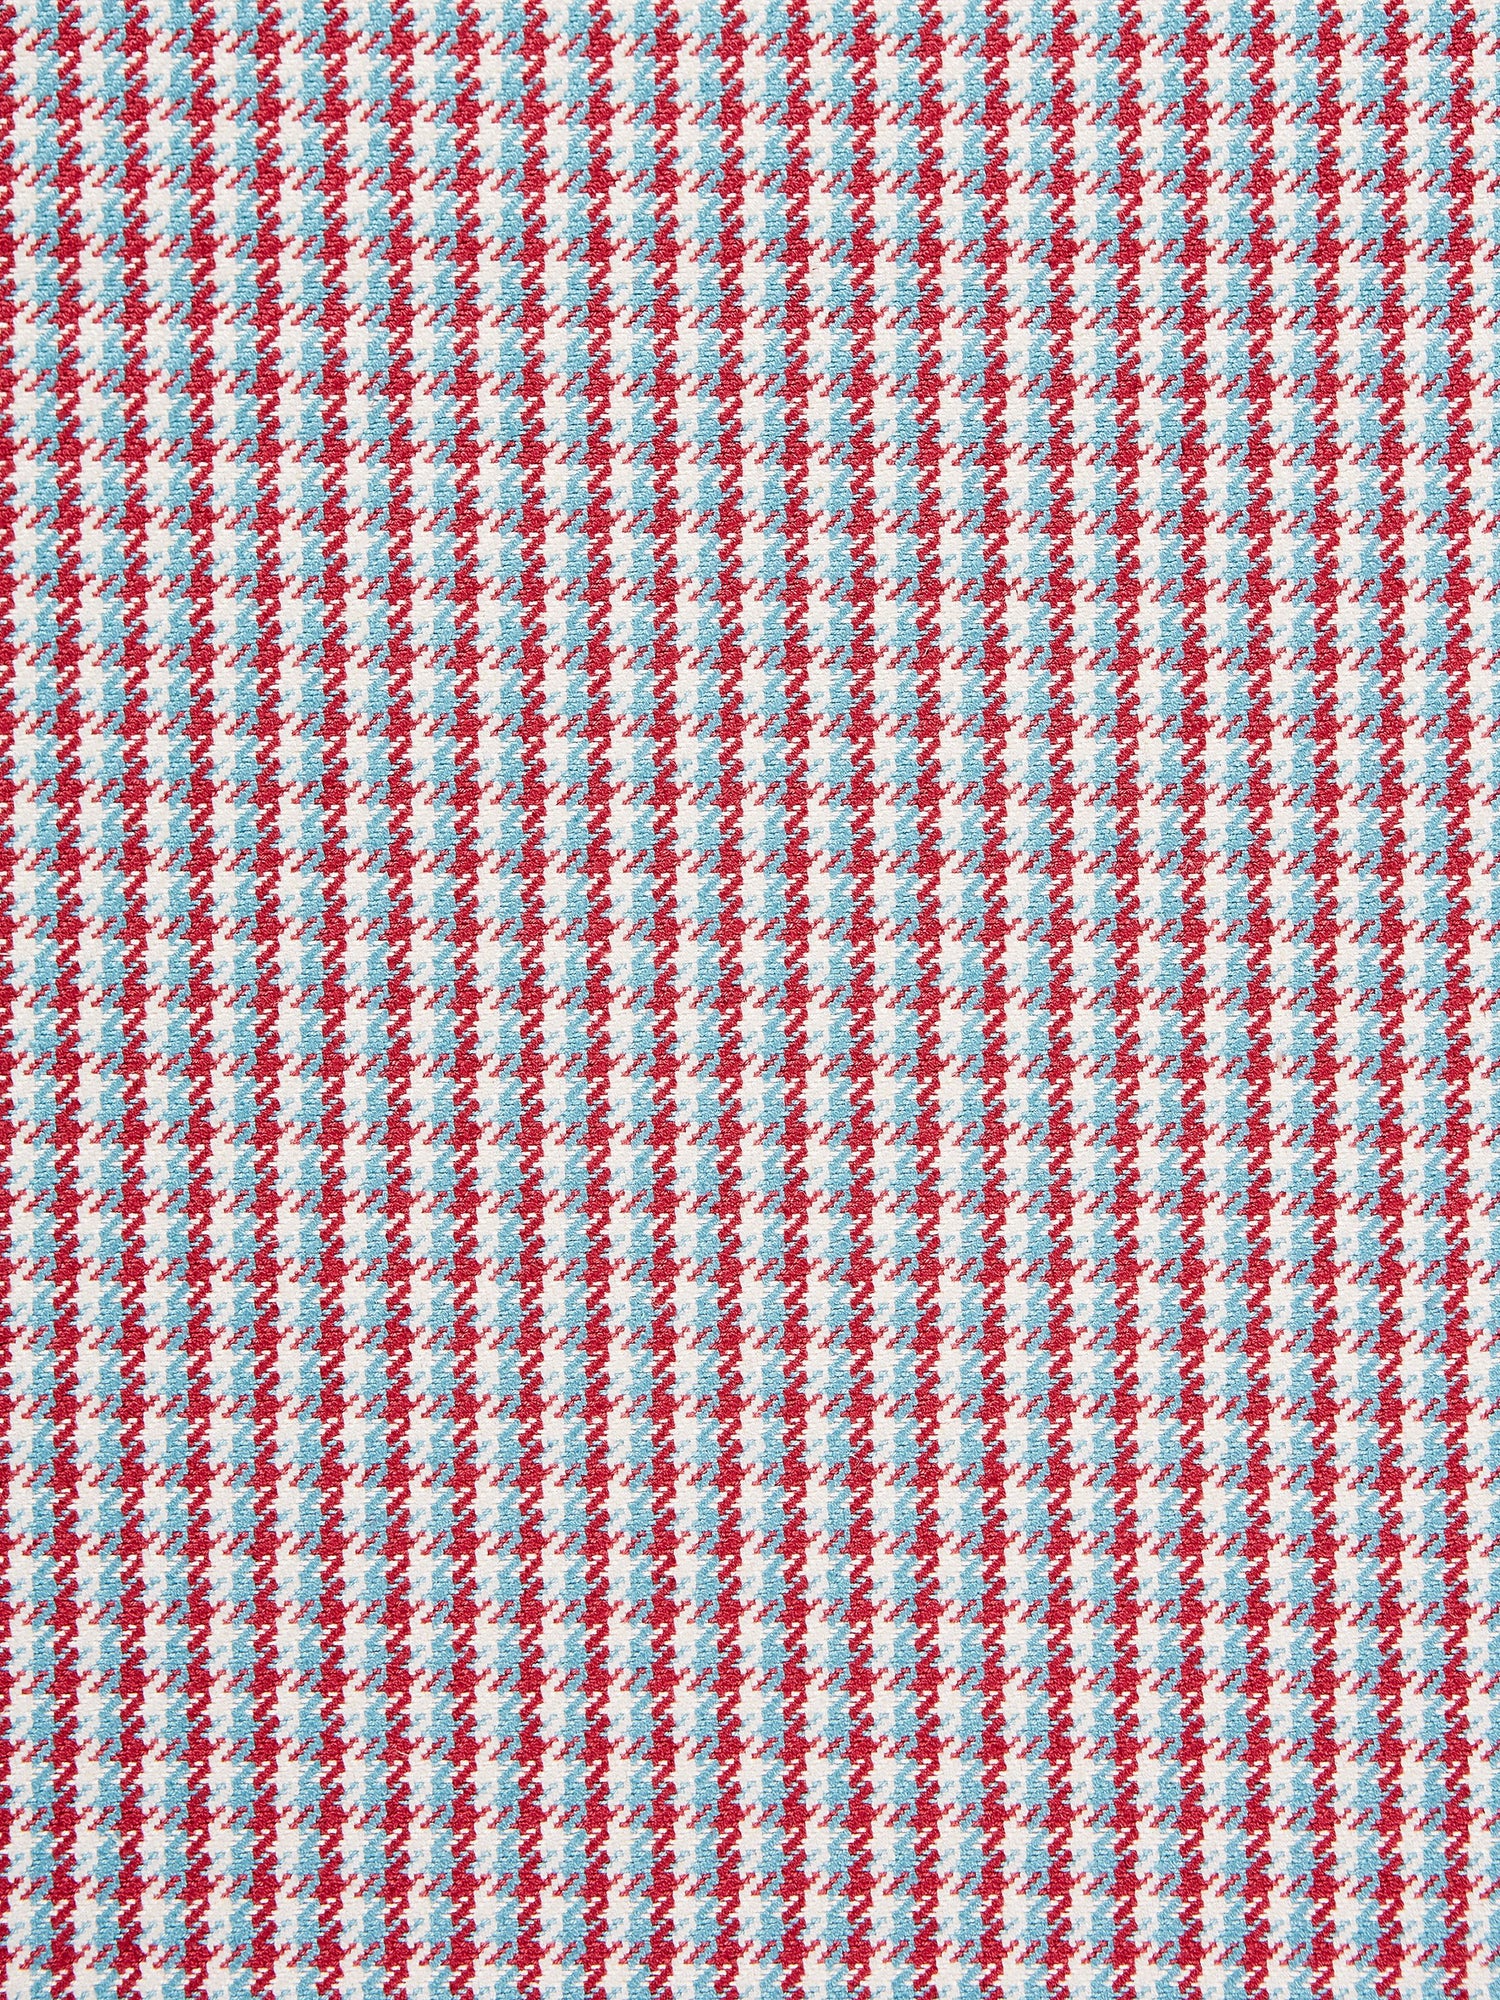 Tattersall Check fabric in aqua and cerise color - pattern number SC 000227013 - by Scalamandre in the Scalamandre Fabrics Book 1 collection